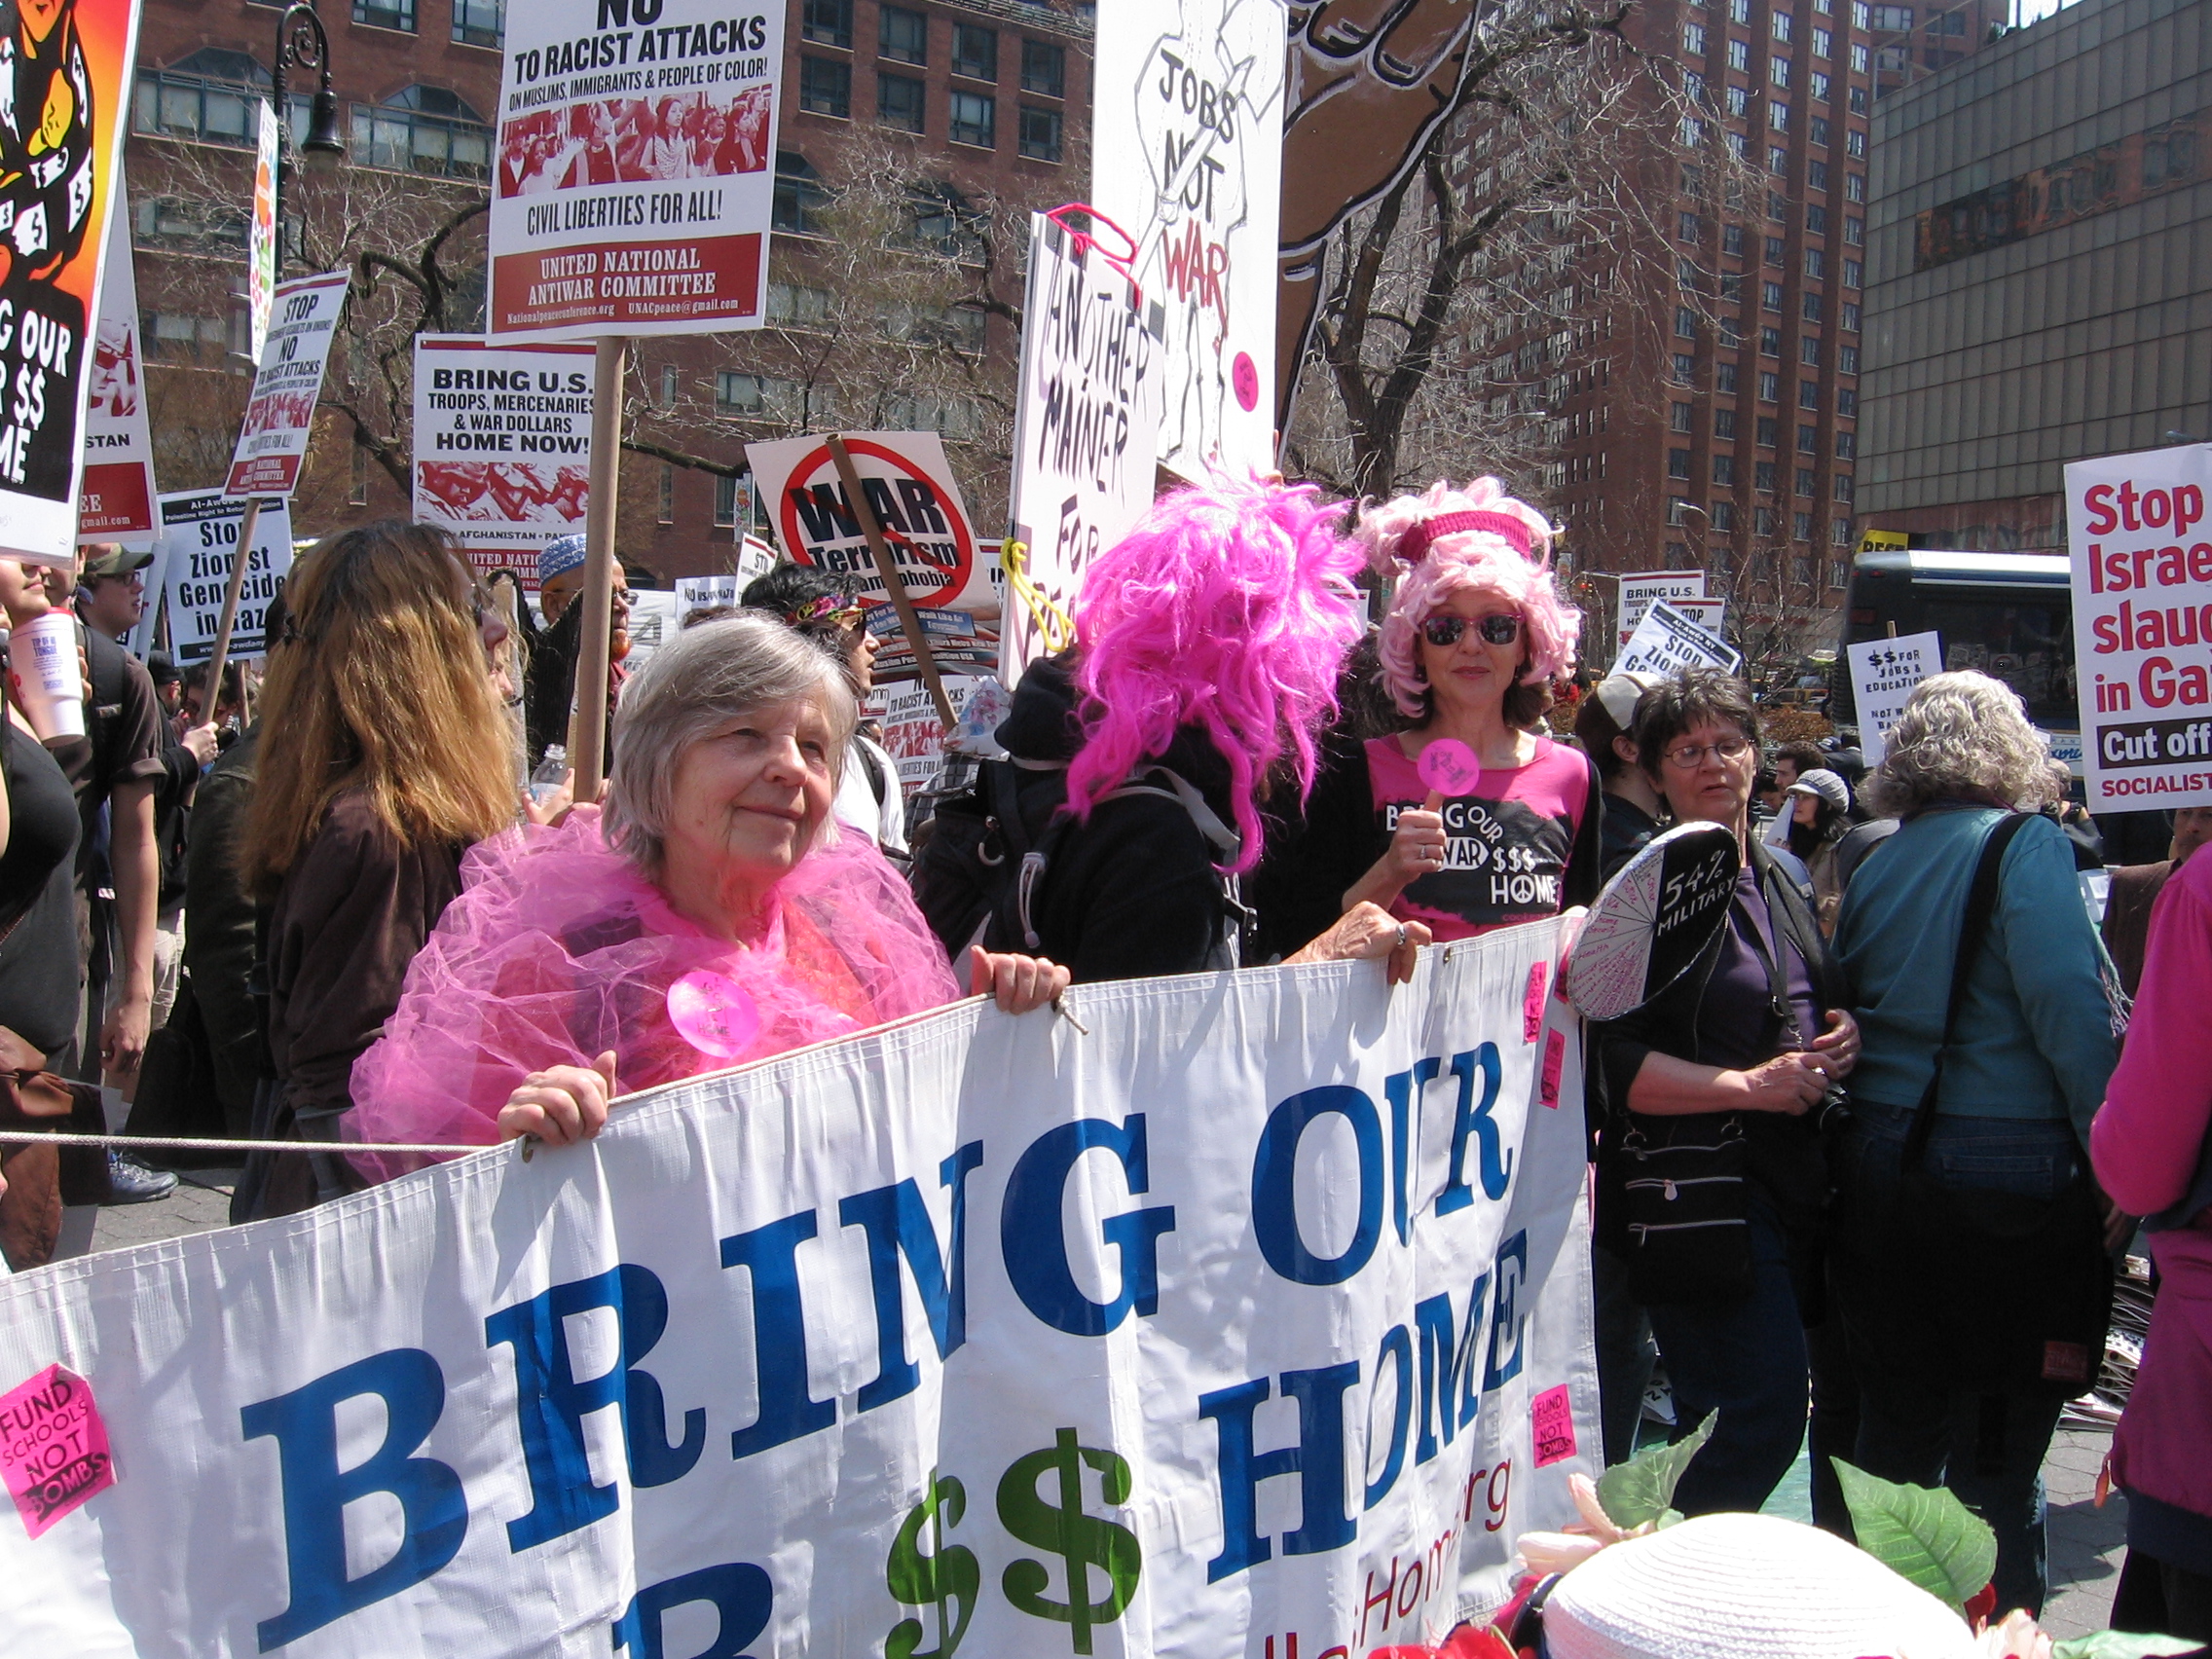 Code Pink - Bring Our War $$ Home